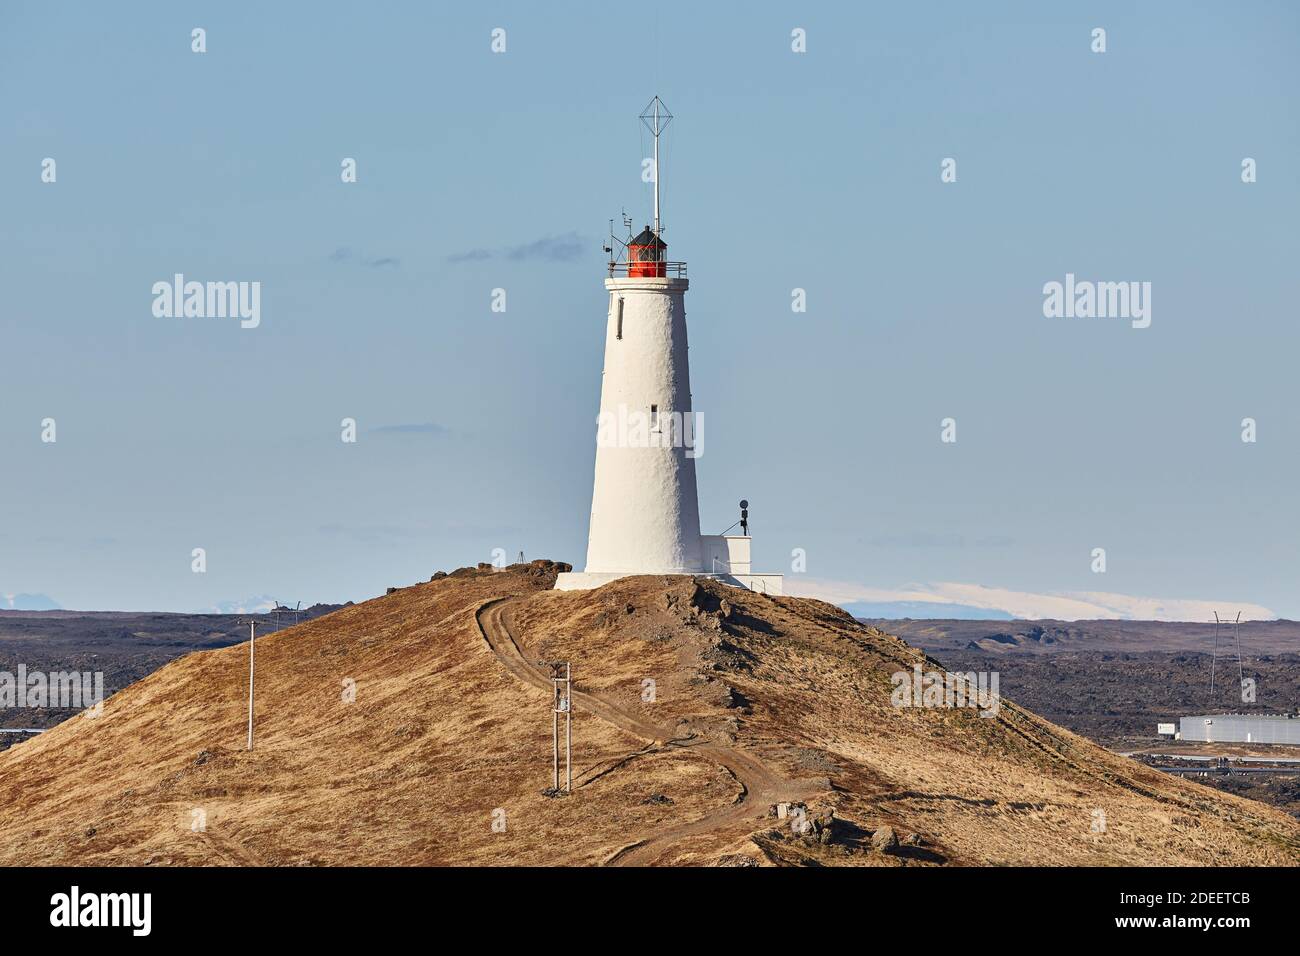 Old White Lighthouse on a hill Stock Photo